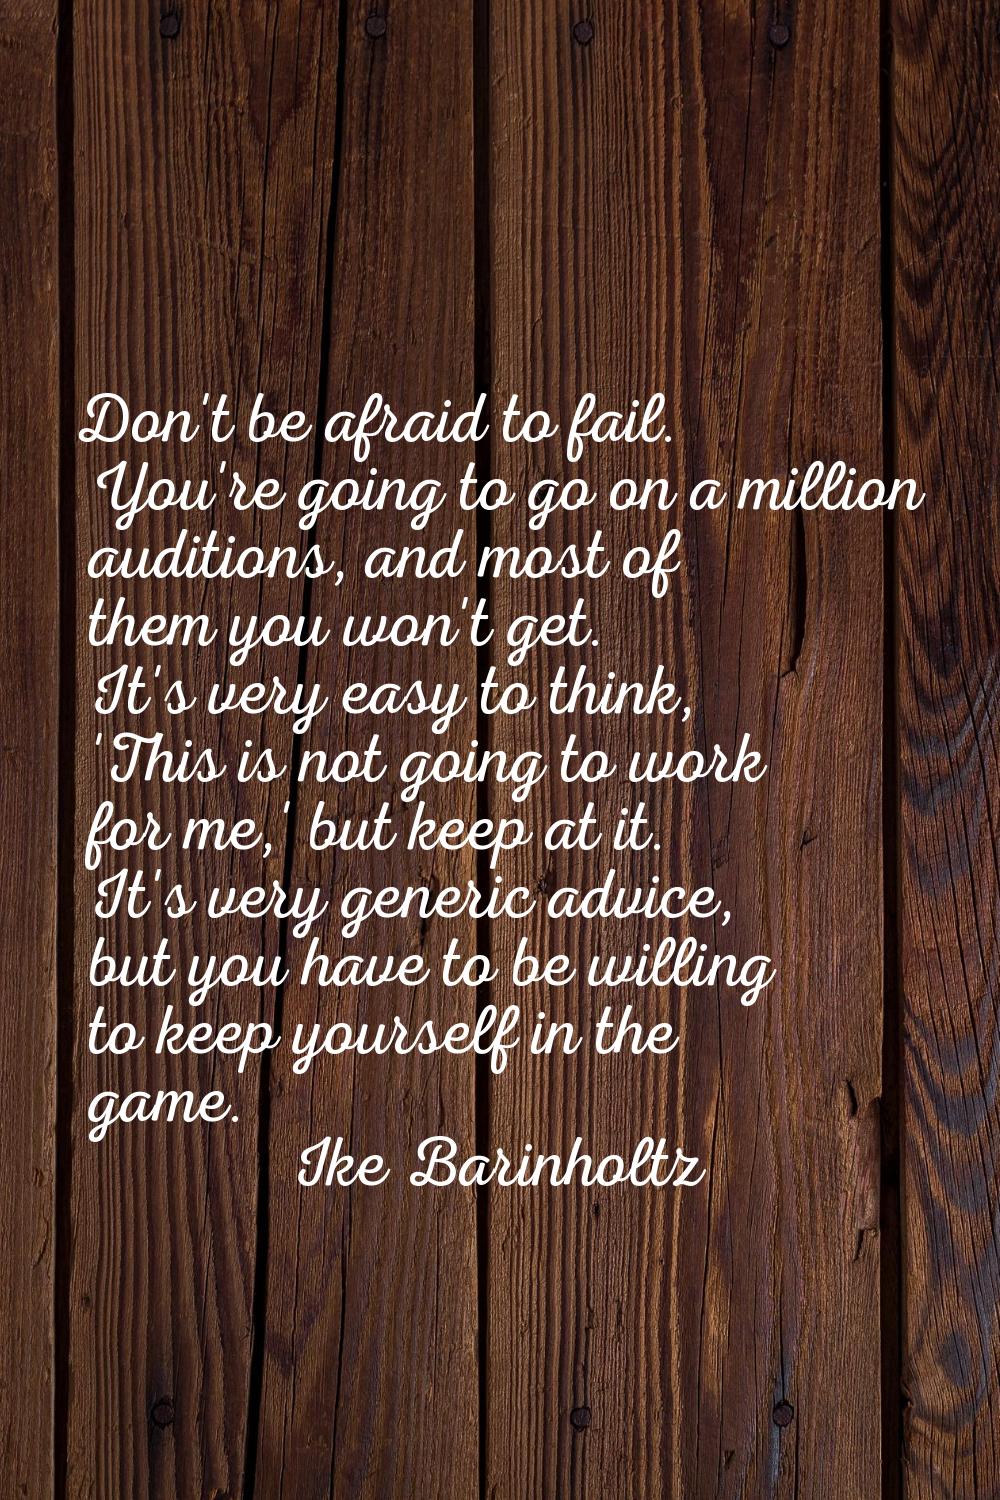 Don't be afraid to fail. You're going to go on a million auditions, and most of them you won't get.